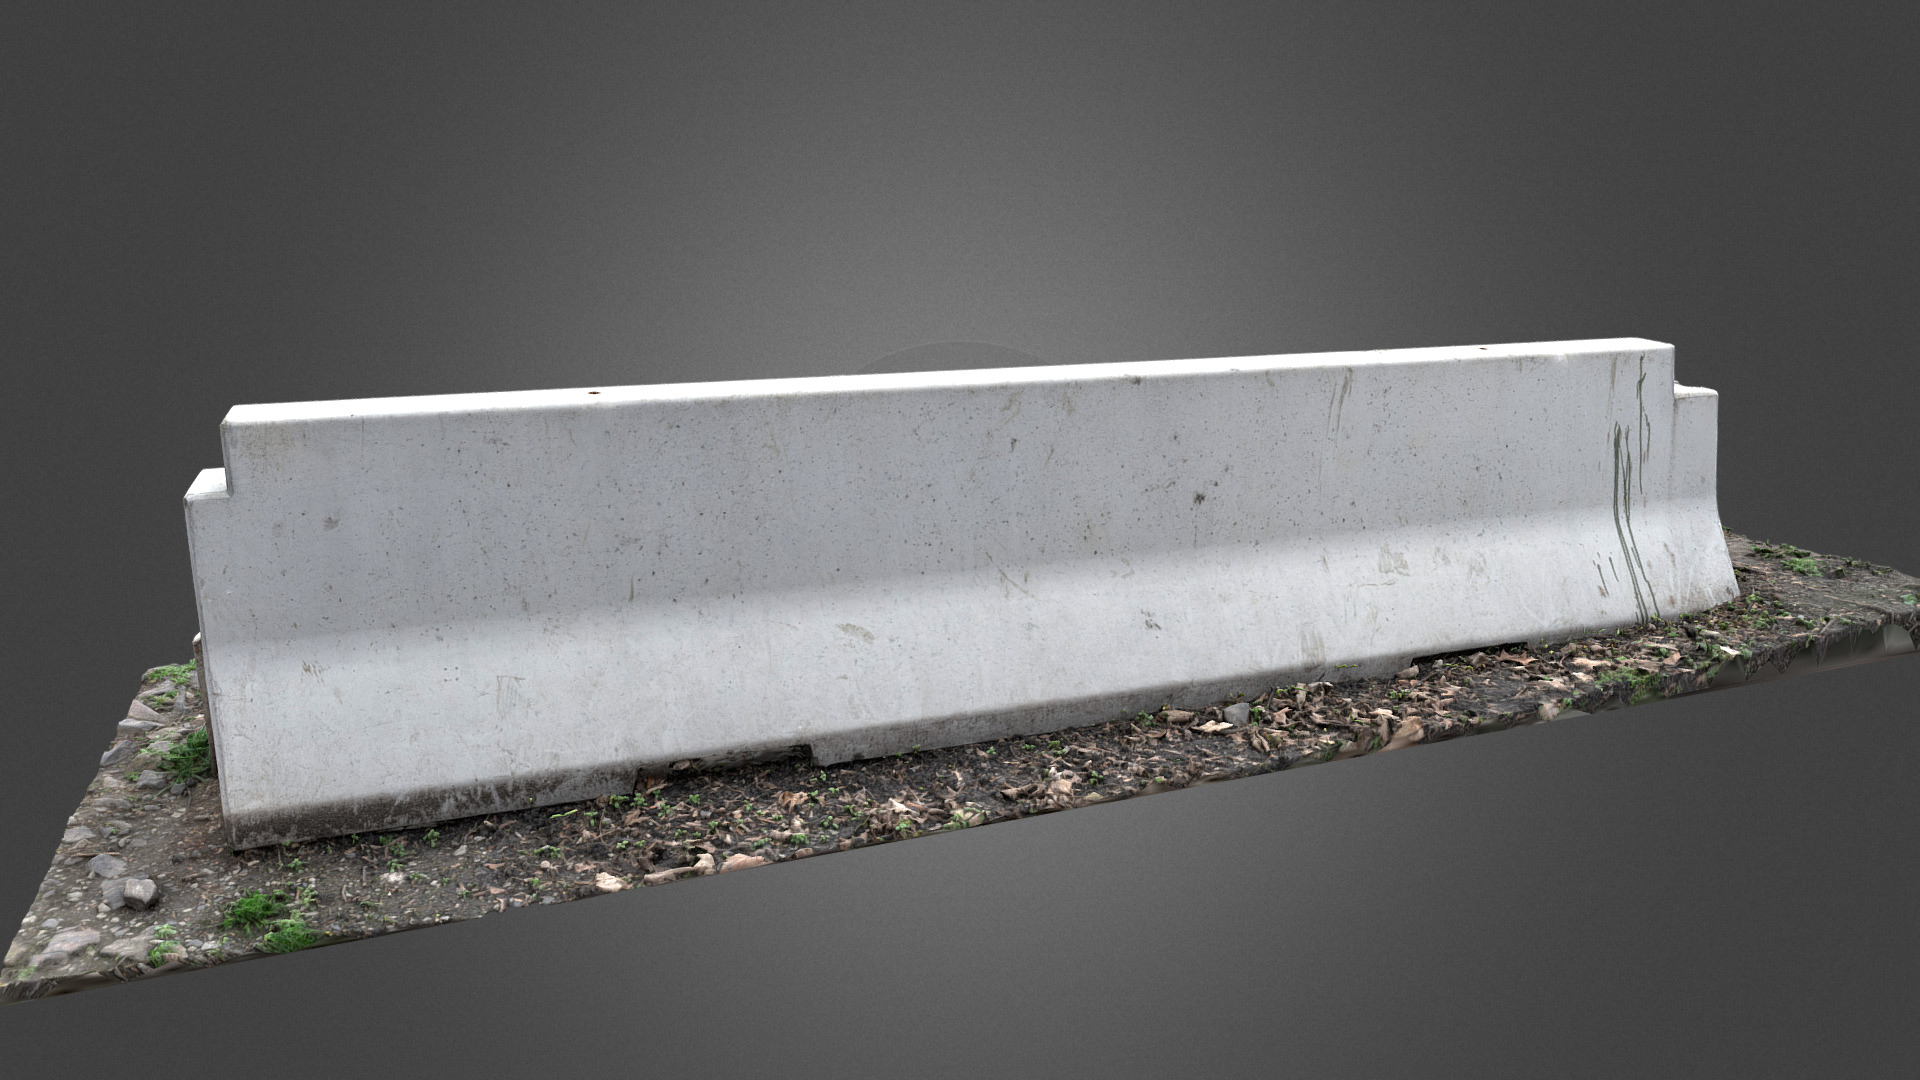 3D model Concrete jersey road barrier wall - This is a 3D model of the Concrete jersey road barrier wall. The 3D model is about a white rectangular object on a concrete surface.